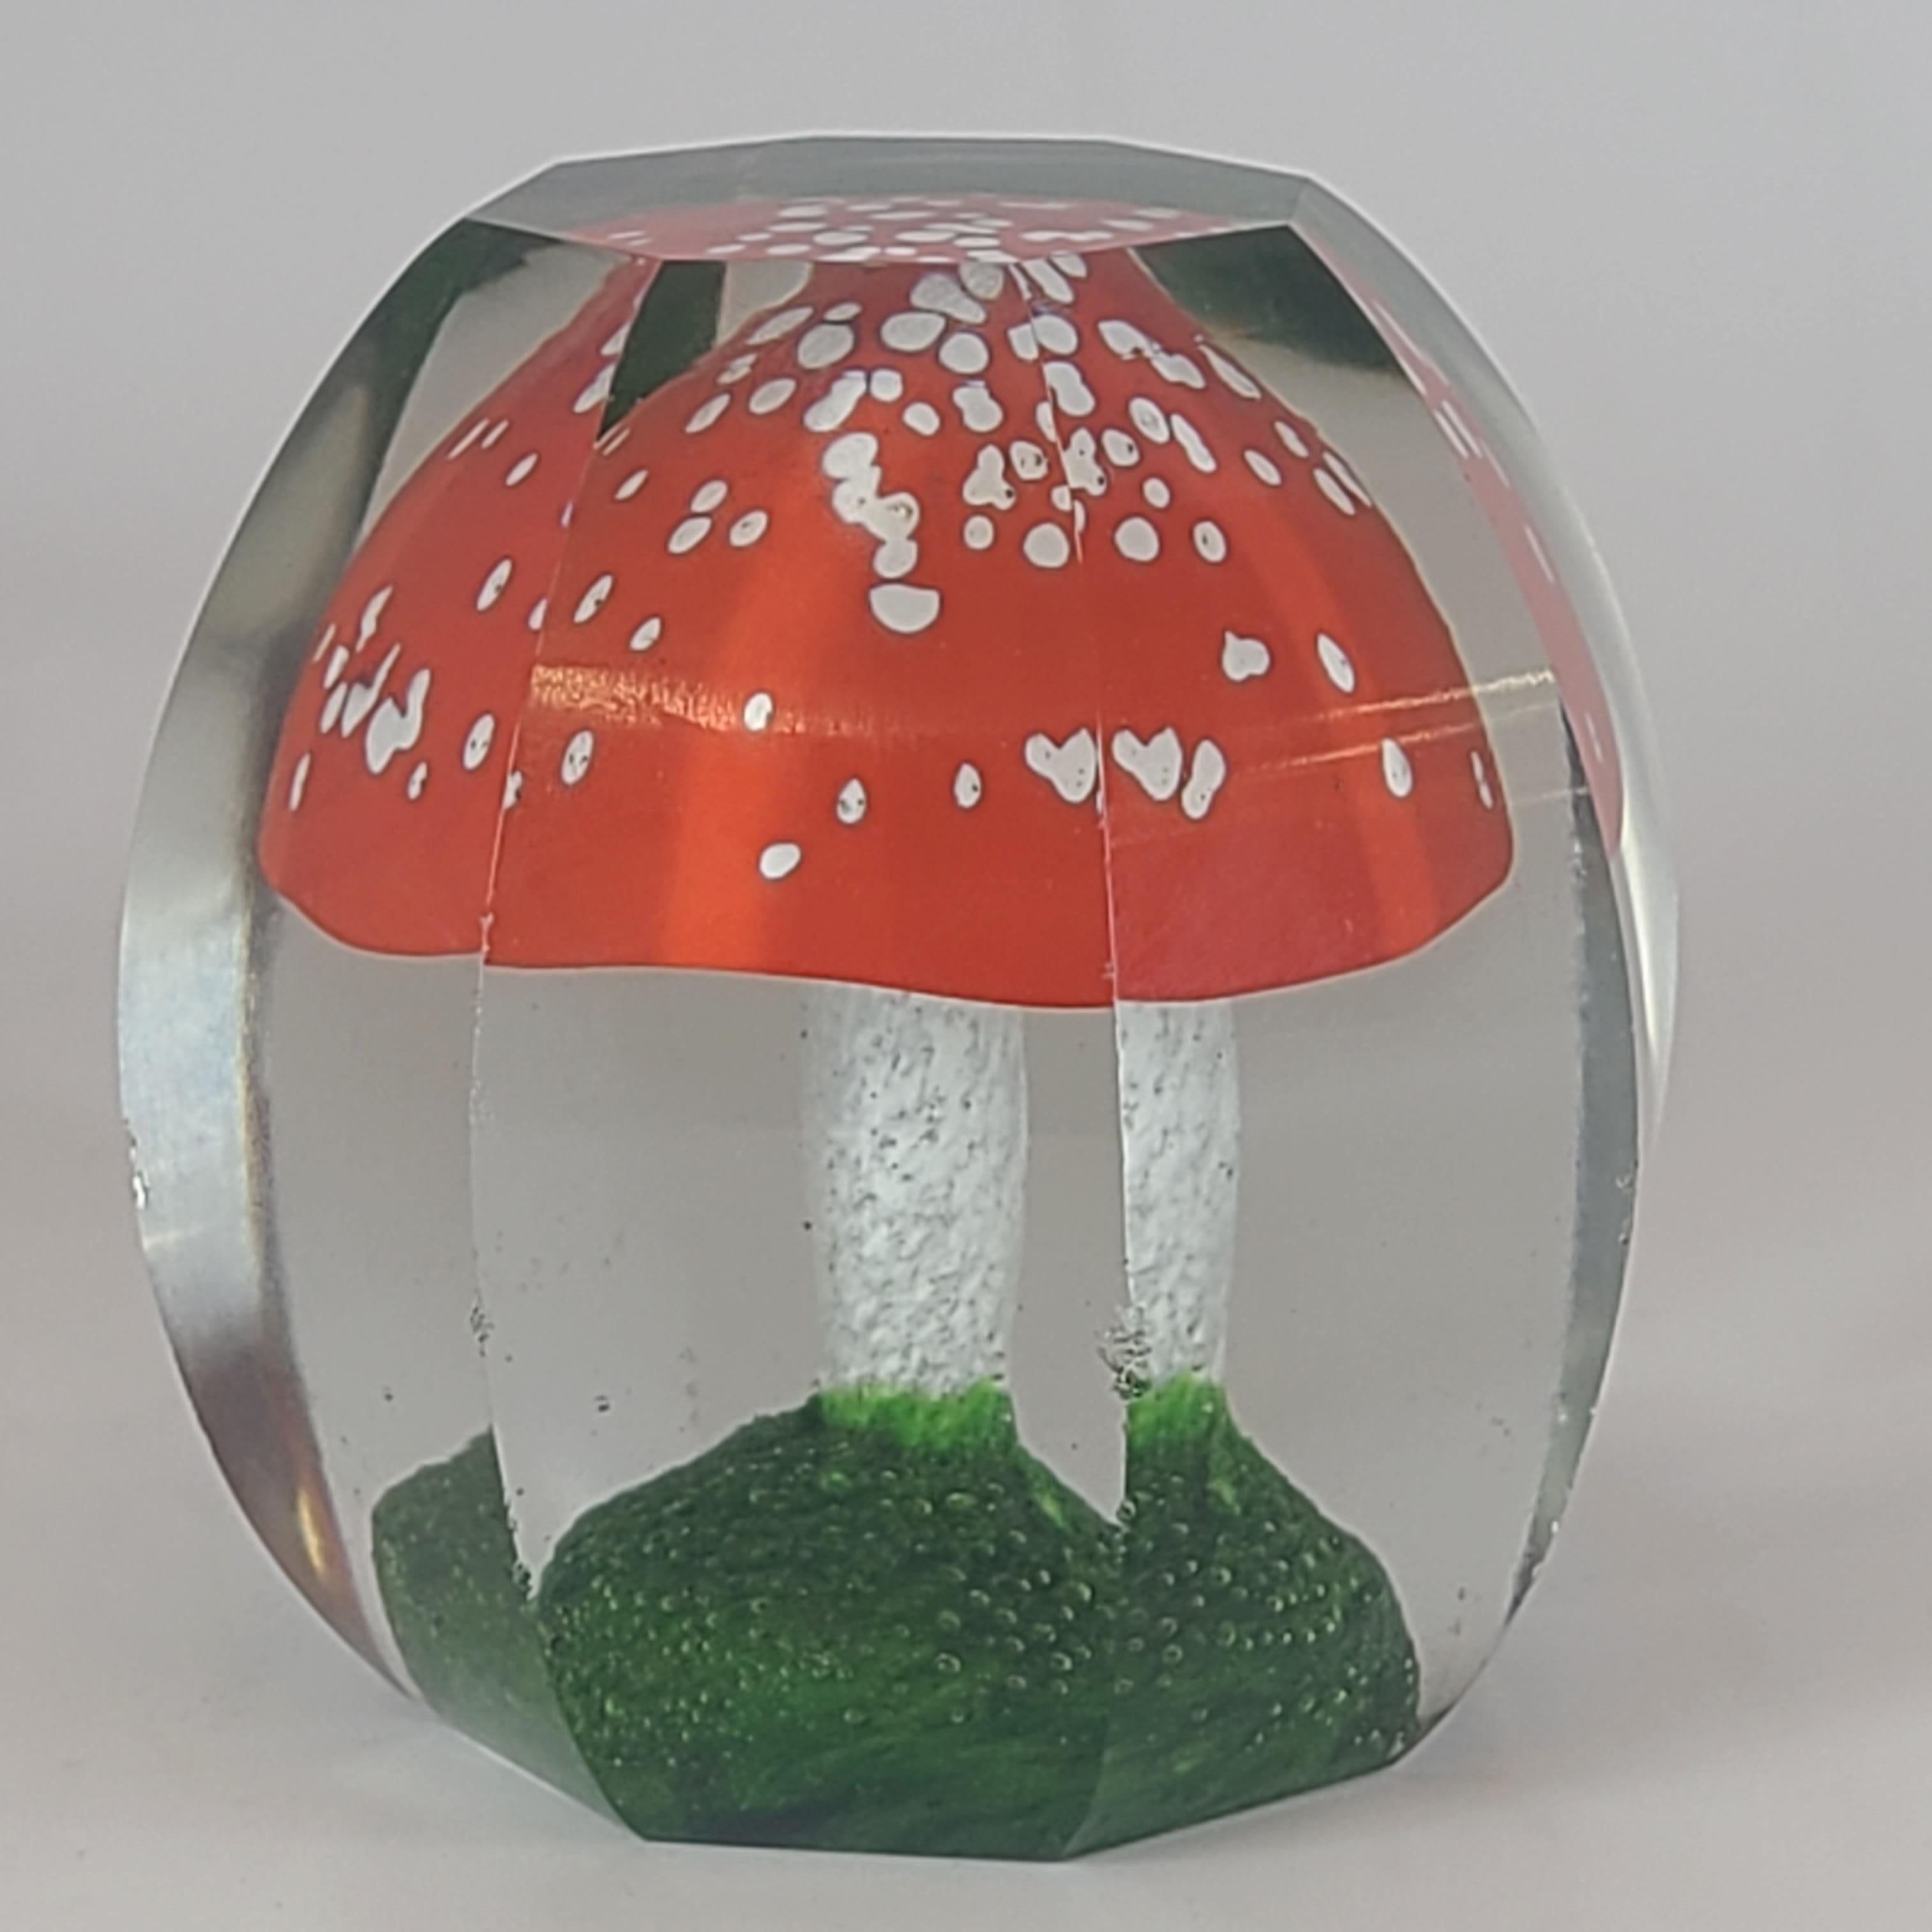 Rare Faceted Bohemian Amanita Muscaria Glass Paperweight For Sale 5